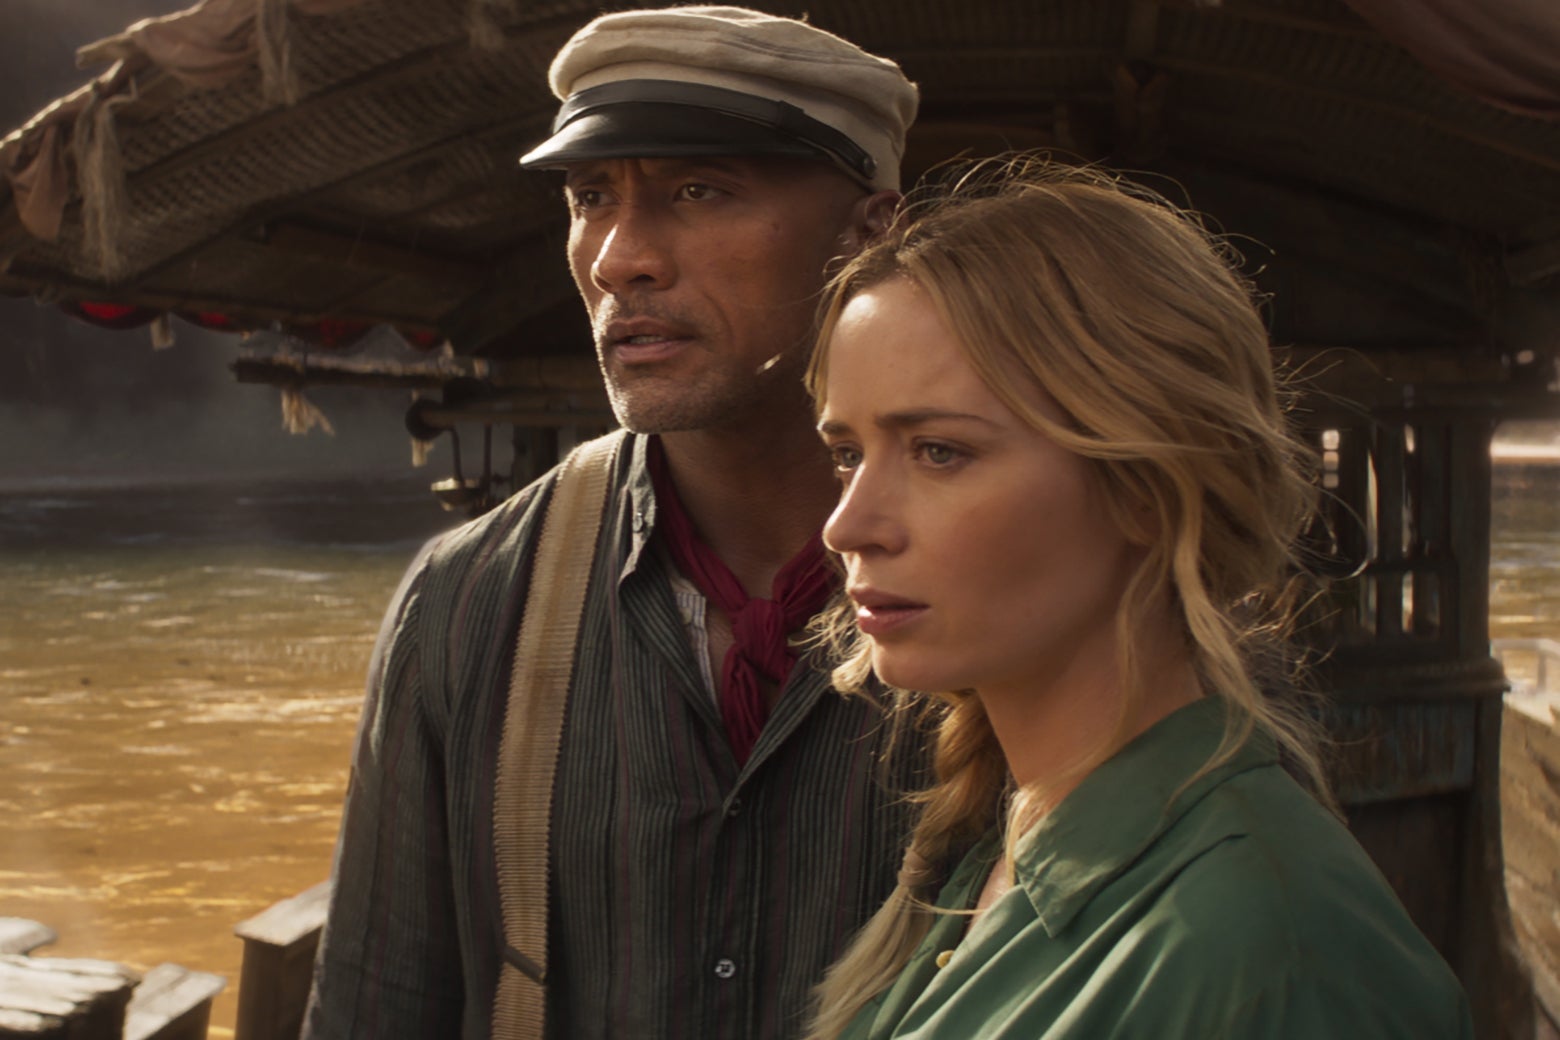 Dwayne The Rock Johnson and Emily Blunt stand on a boat in a still from Jungle Cruise.